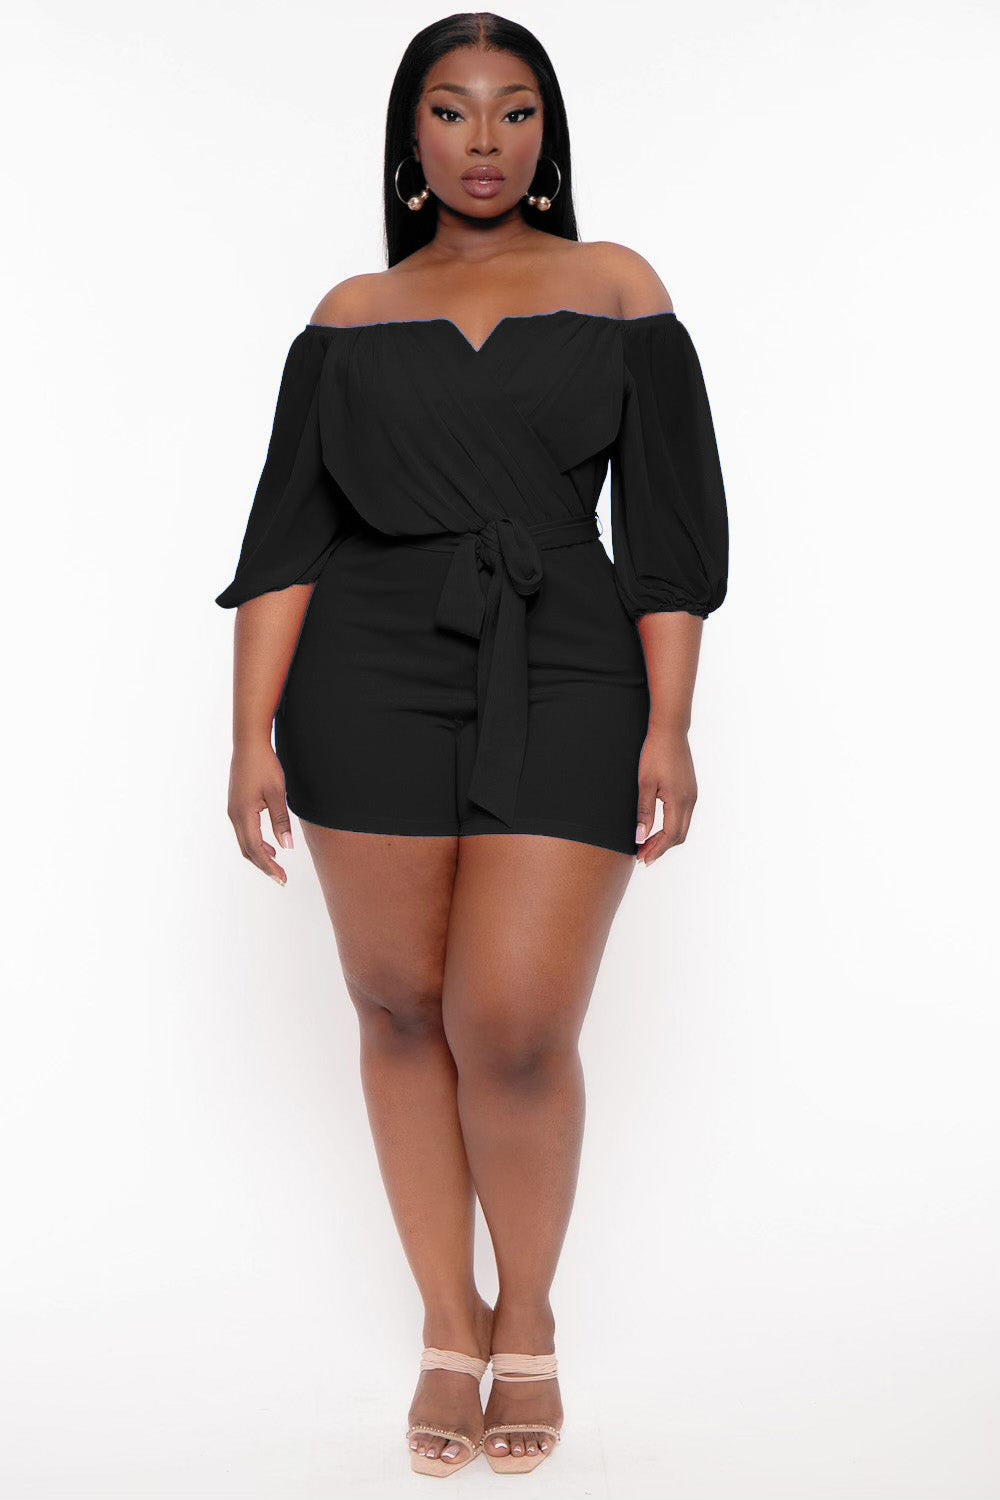 Find Me Jumpsuits and Rompers 1X / Black Plus Size Aryana Cross Over Romper - Black